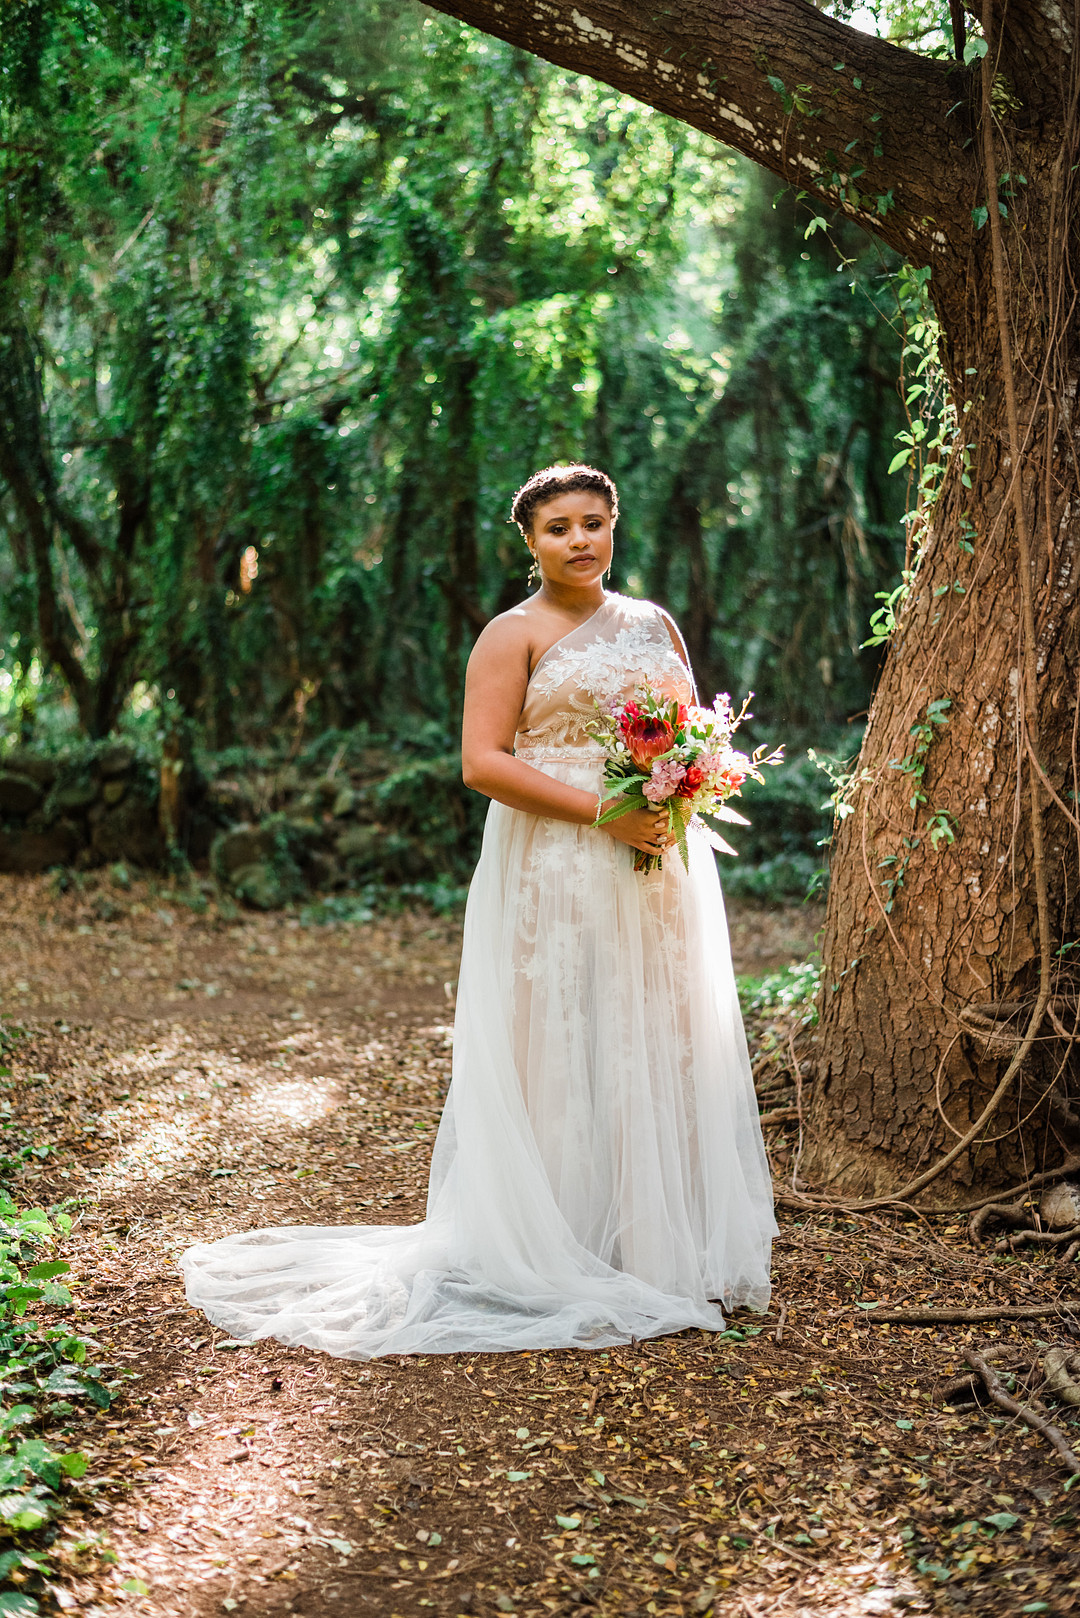 Just Mauid: An Intimate Tropical Elopement in Maui